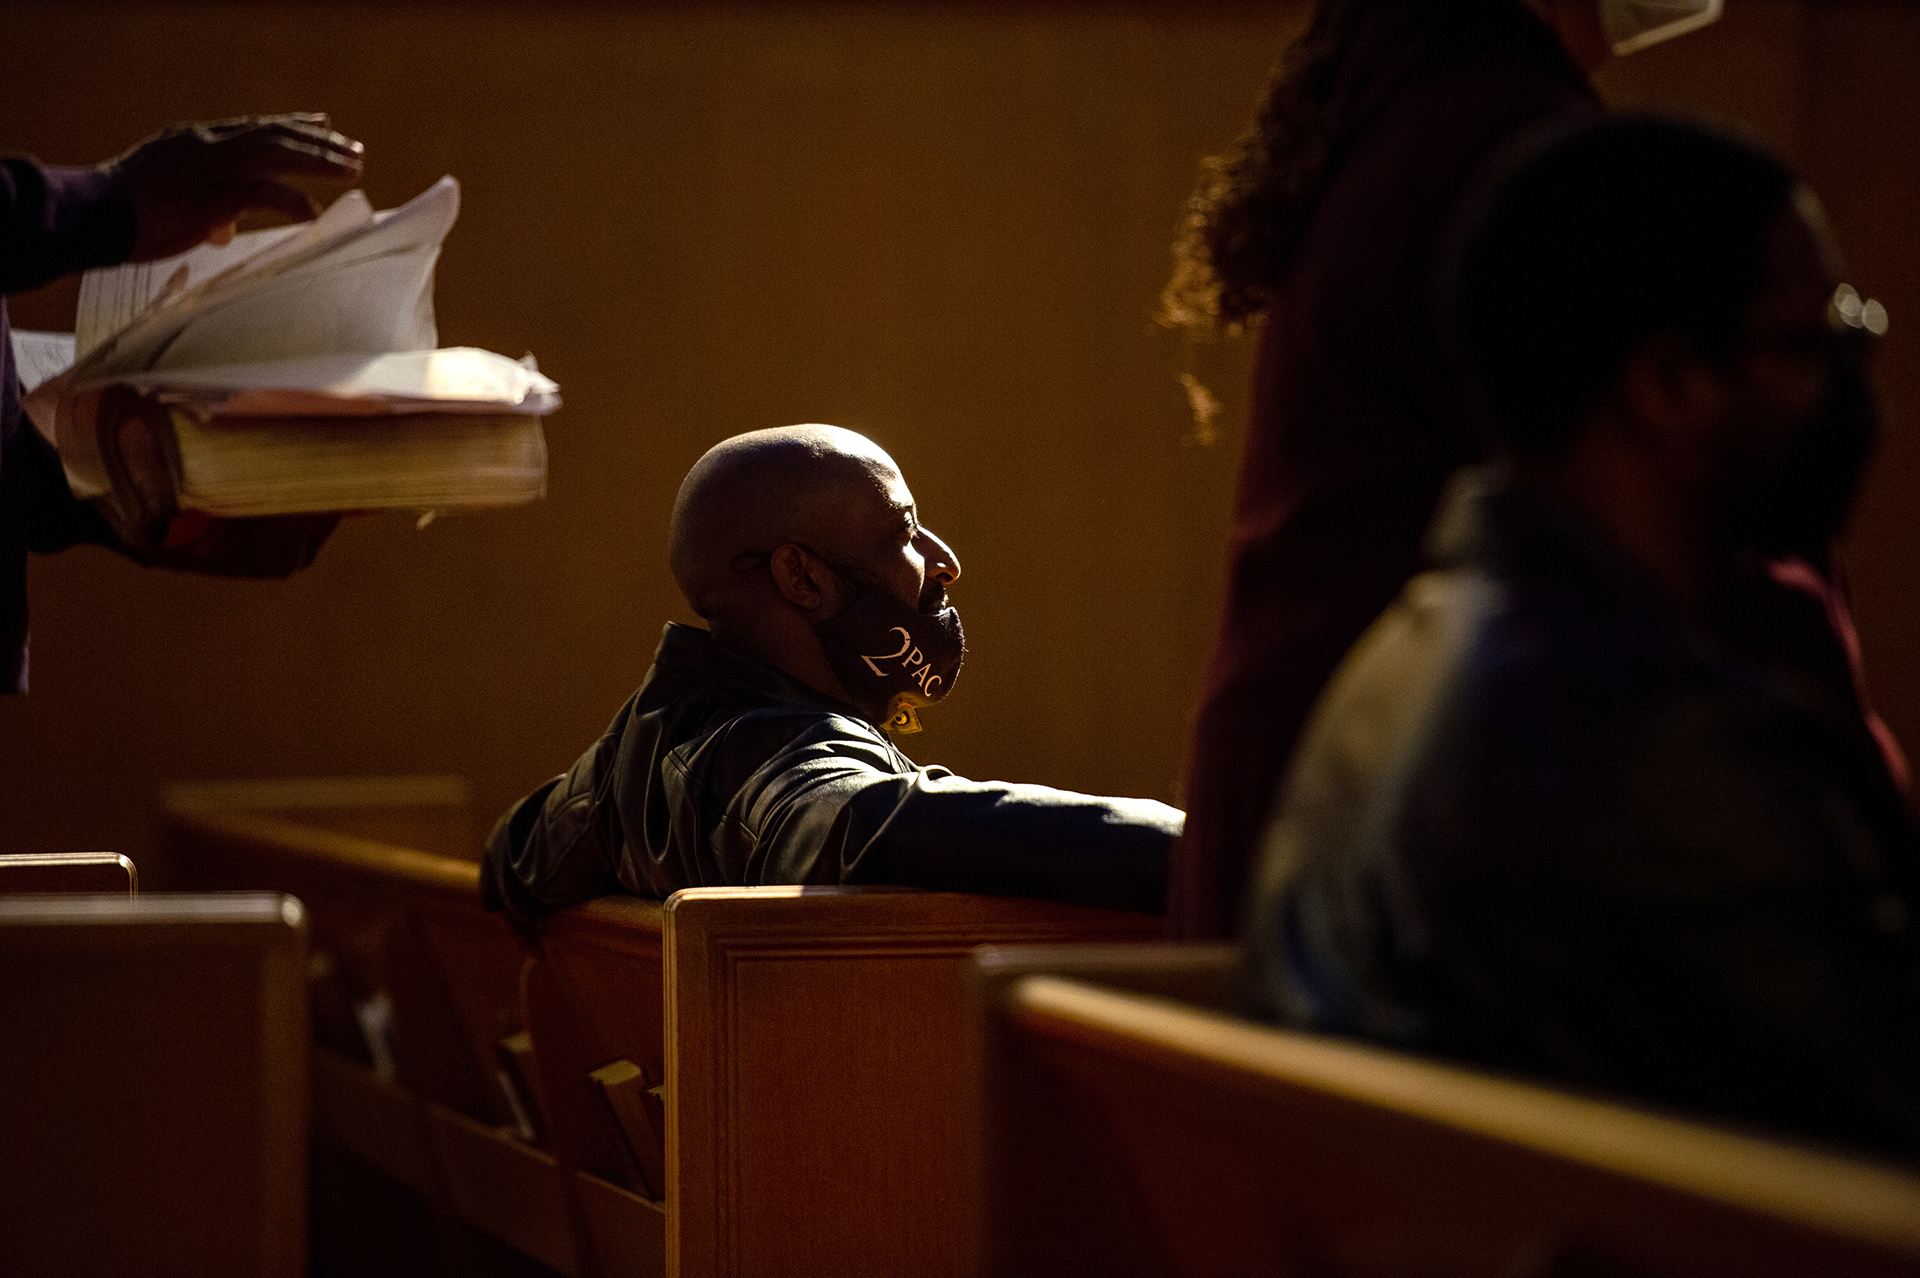 A Black man sits at a church pew, photographed in profile, looking like he is listening intently to something. He is wearing a cloth mask that is pulled down below his nose.